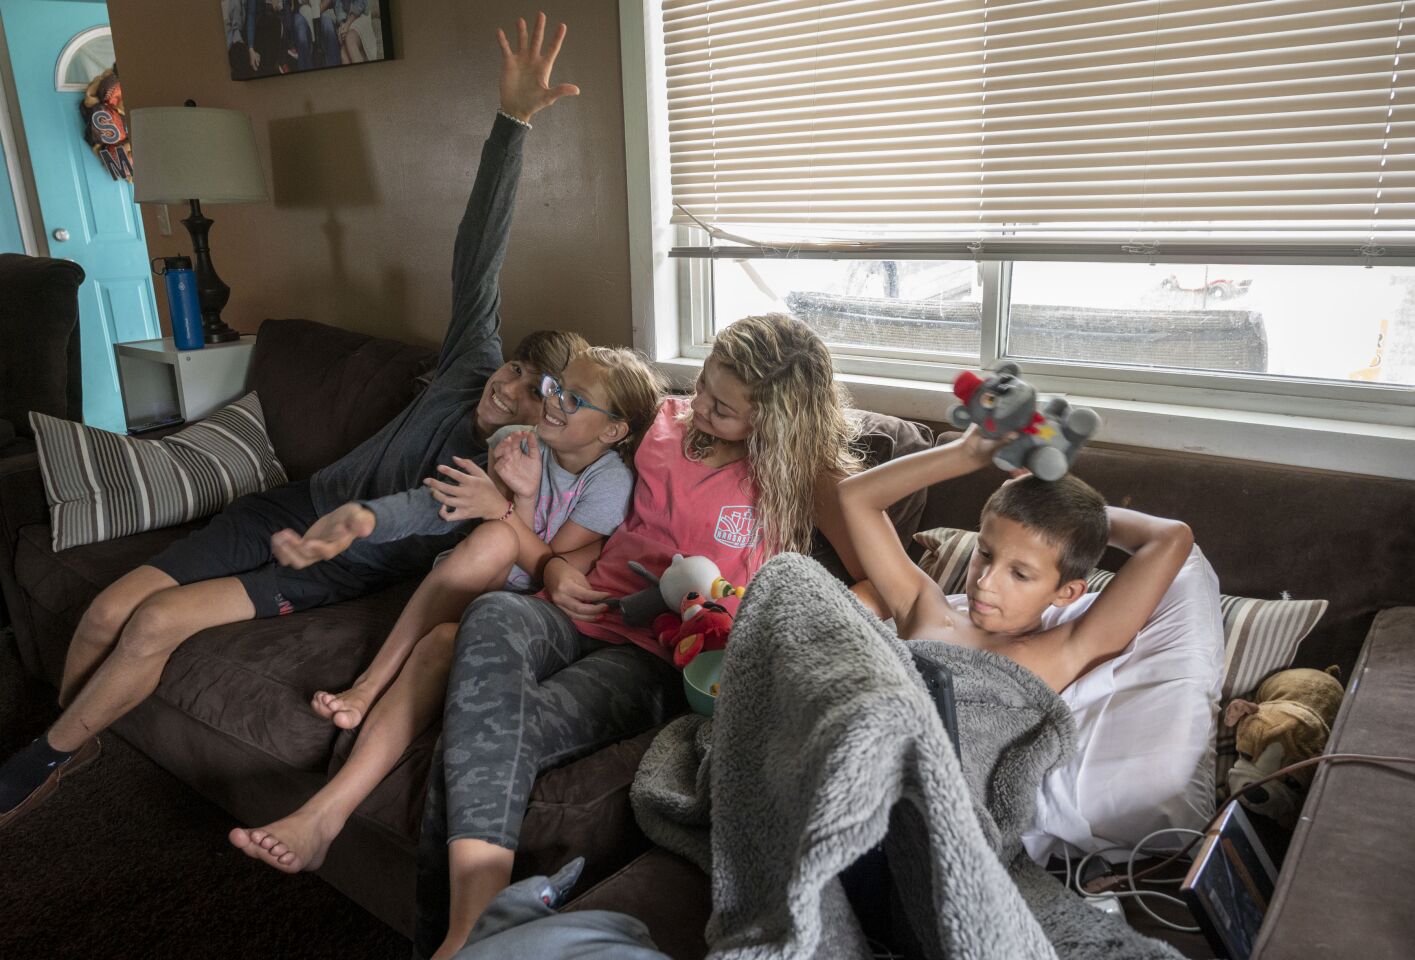 Siblings Johnny, 16; Brooklynn, 9; and Leksi, 18, crowd onto the couch with Bo as he rests.